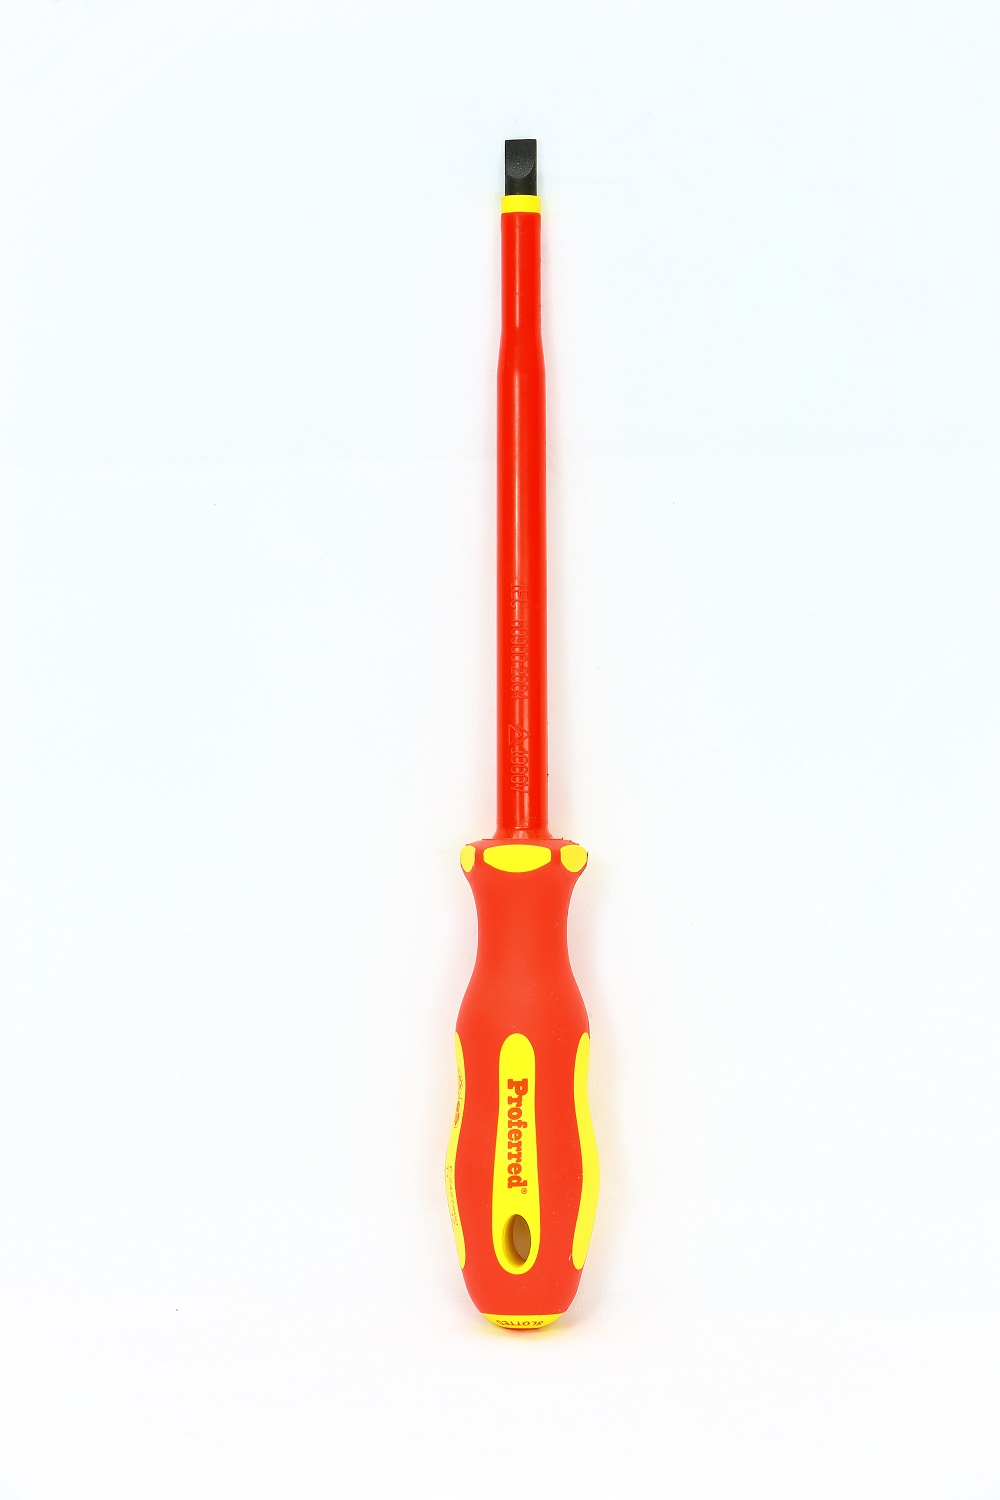 PROFERRED INSULATED SCREWDRIVER SLOTTED ( 1000V) 5/16'' X 7''